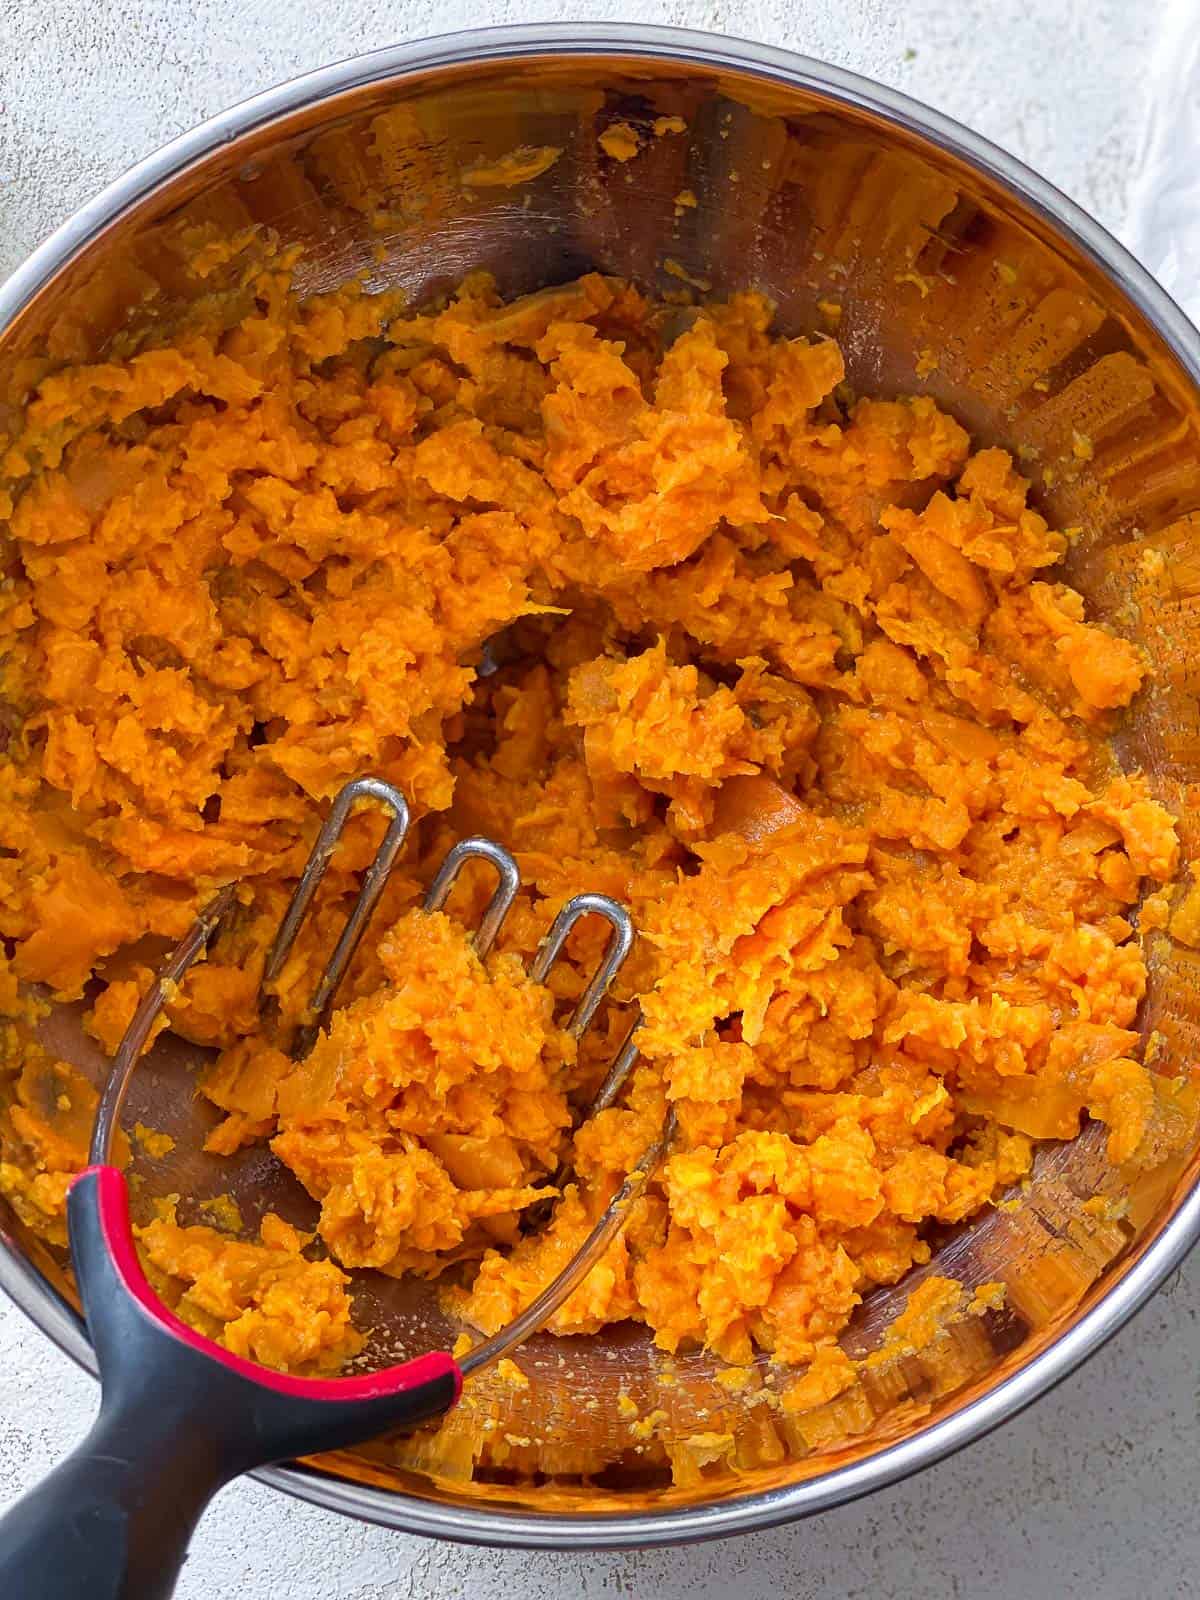 Cooked and mashed sweet potatoes.